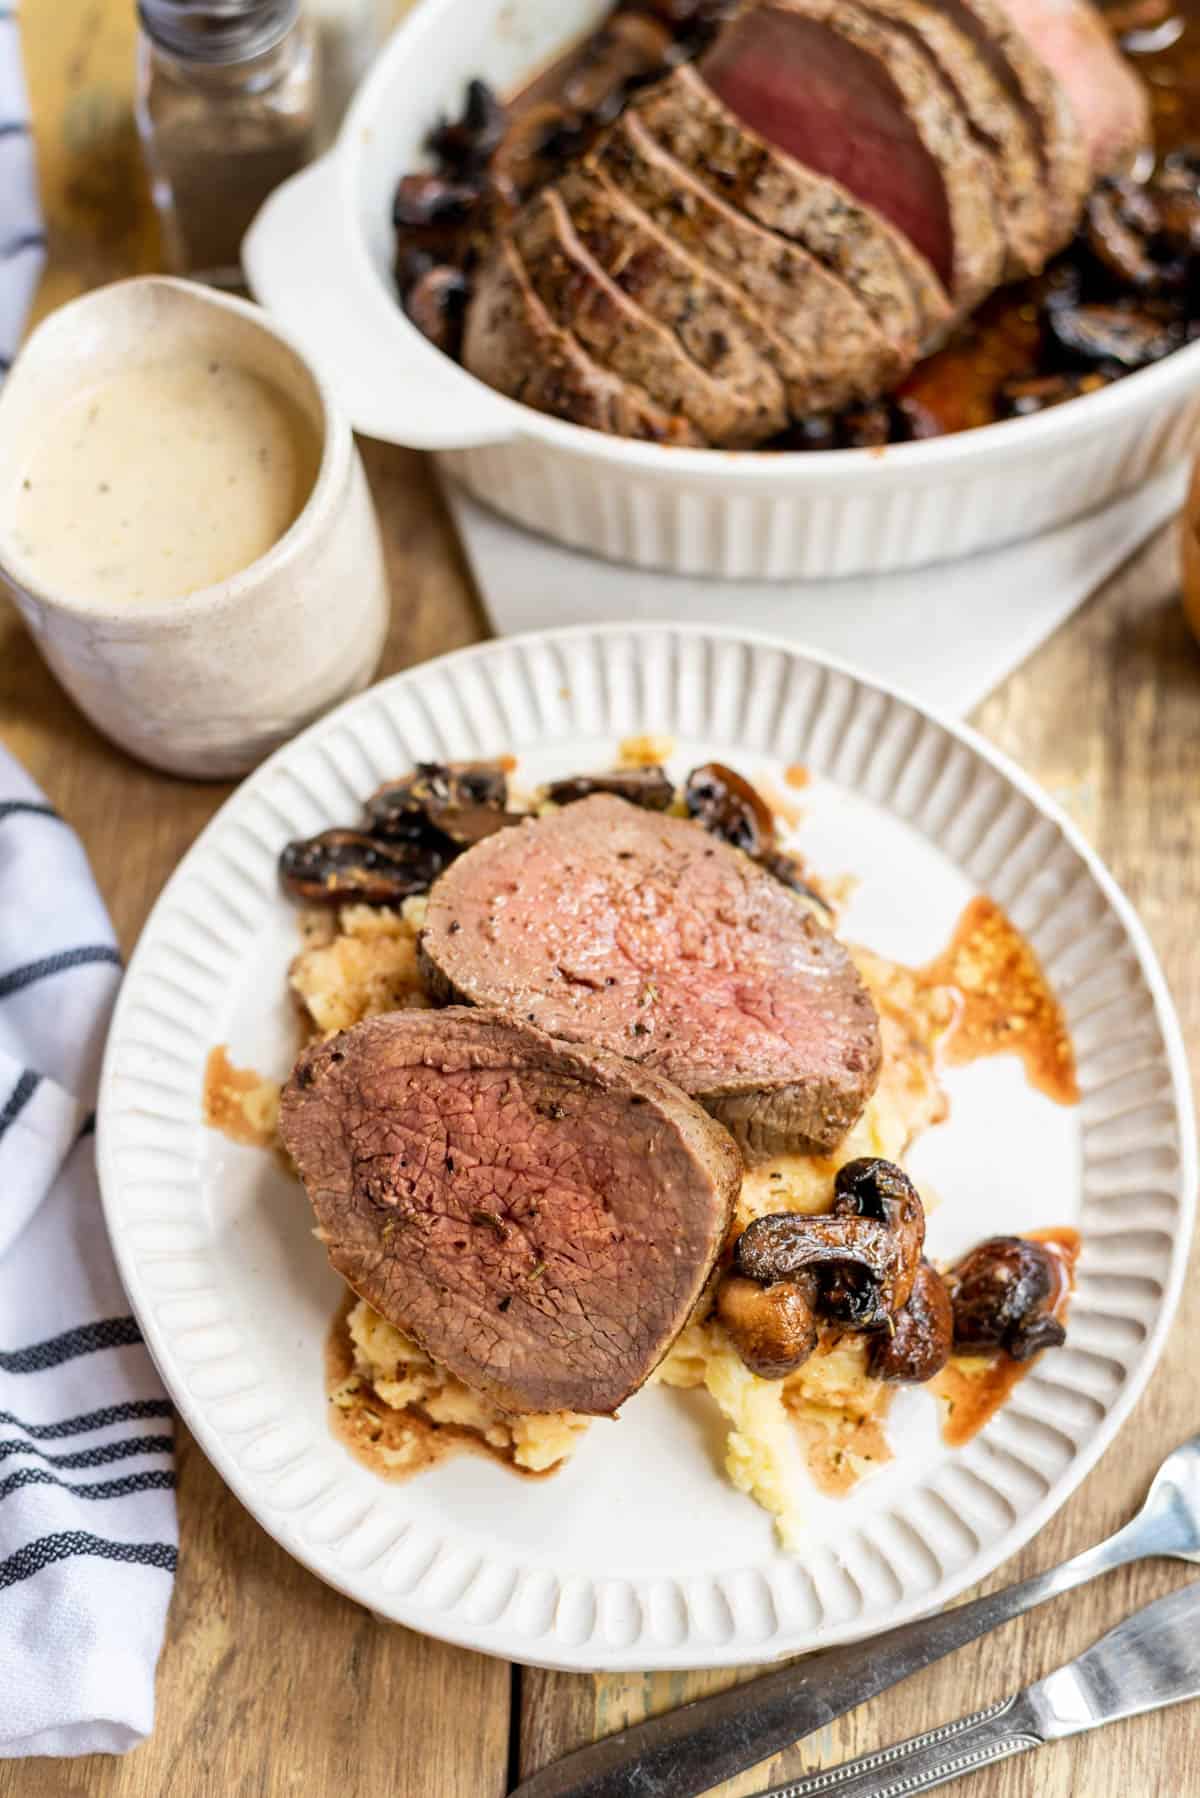 Two slices of beef tenderloin on a plate with mashed potatoes and mushrooms.